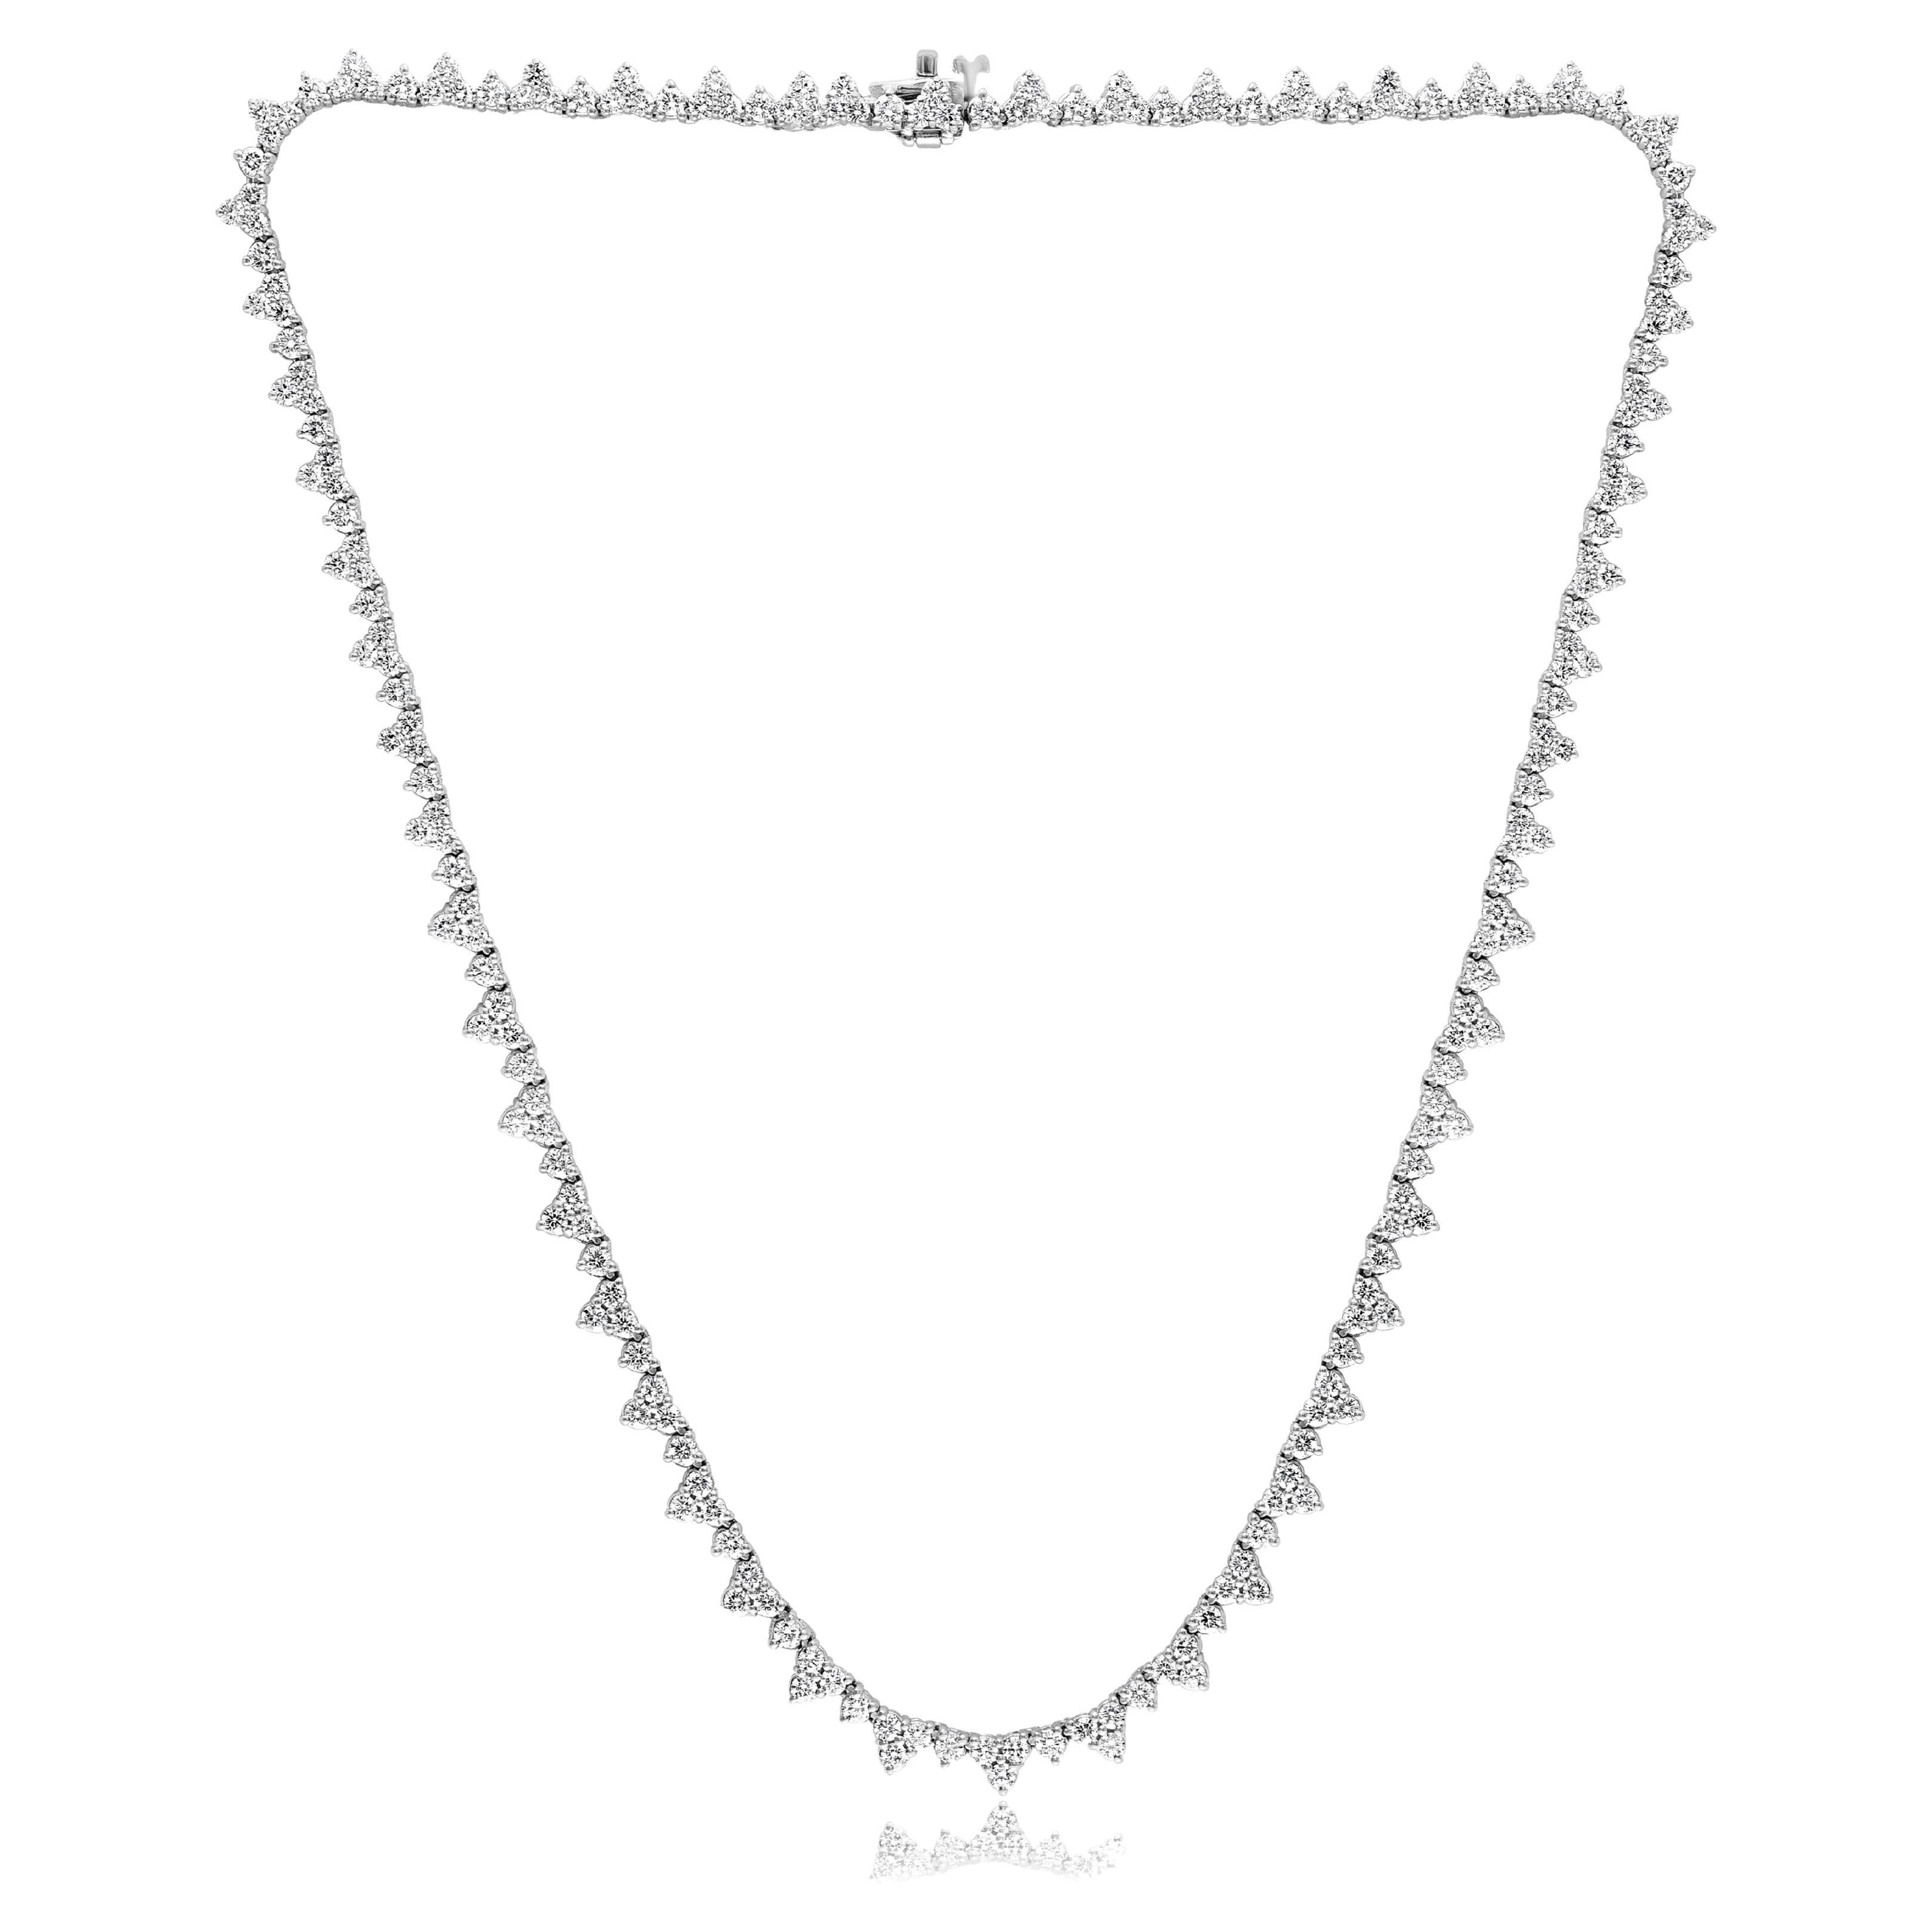 8.46 Carat Diamond Necklace in 14K White Gold For Sale